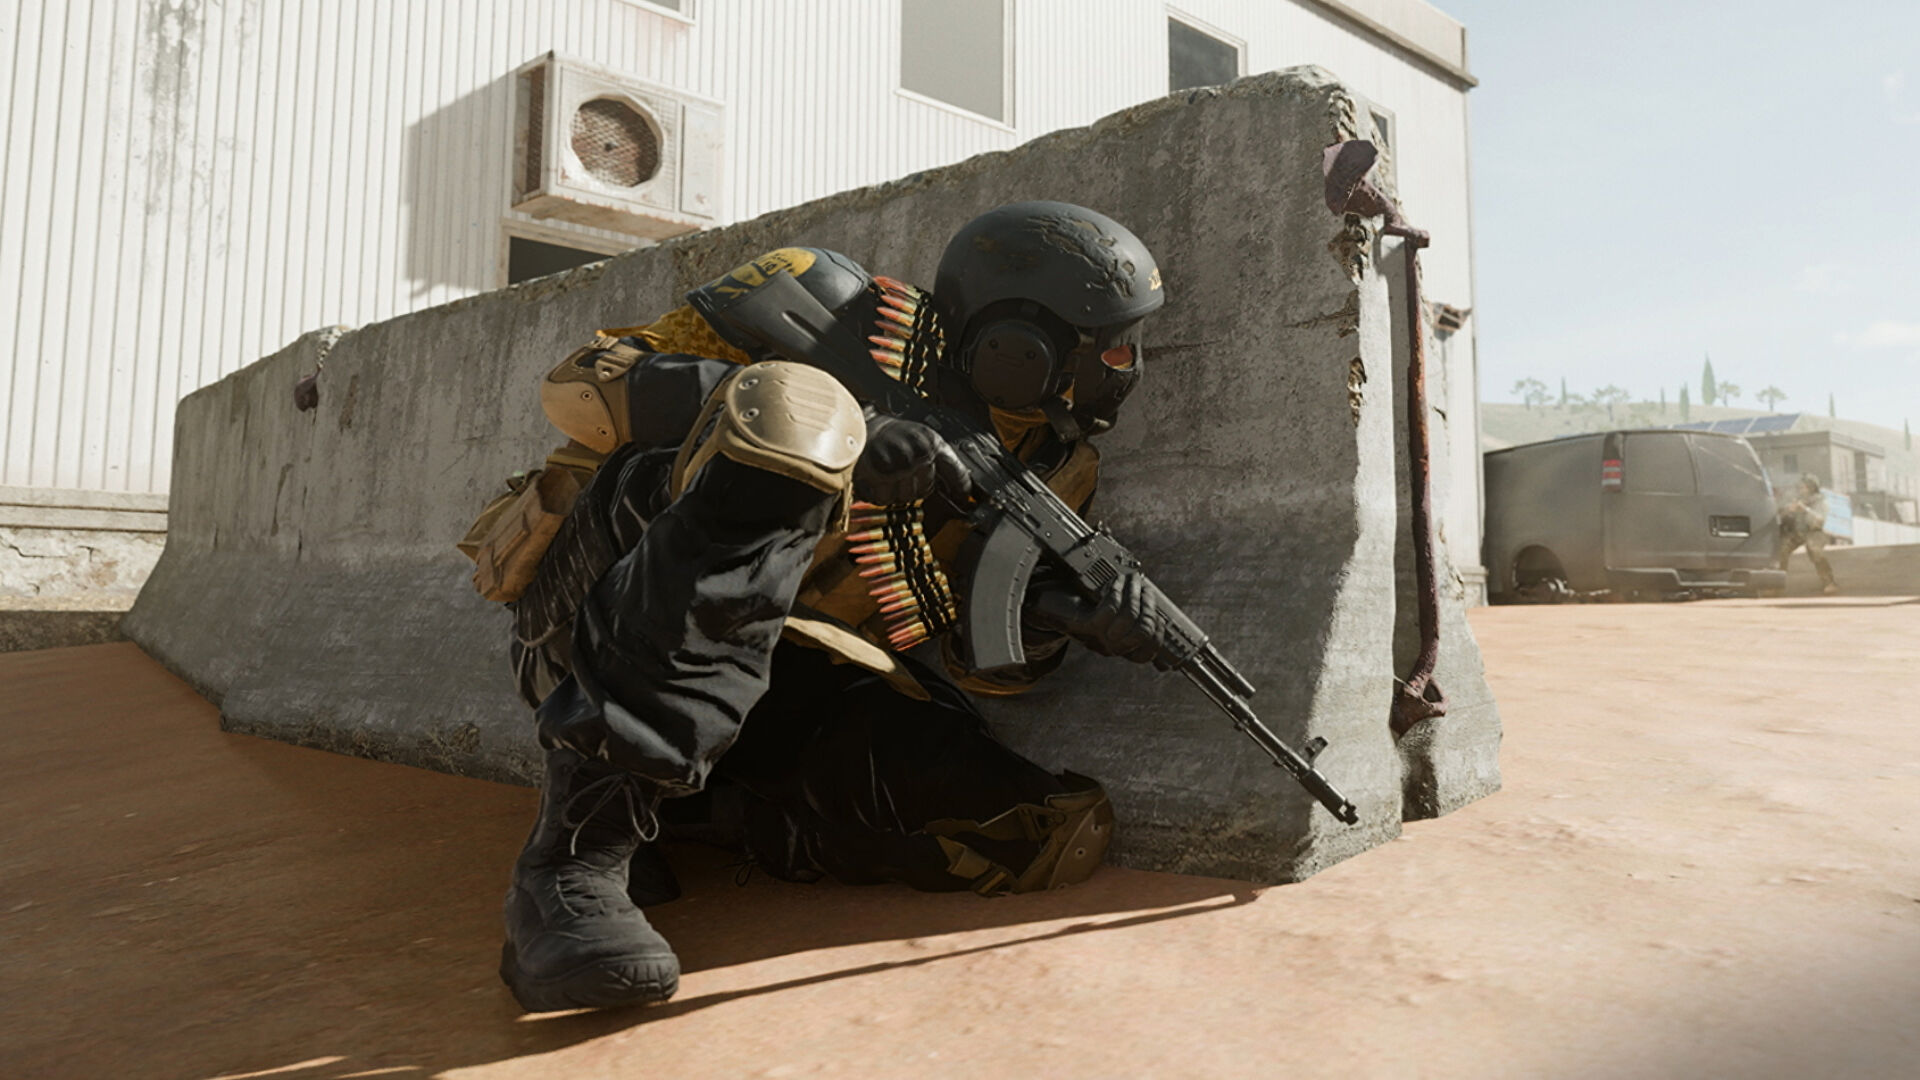 Player crouching behind cover in Warzone 2.0.